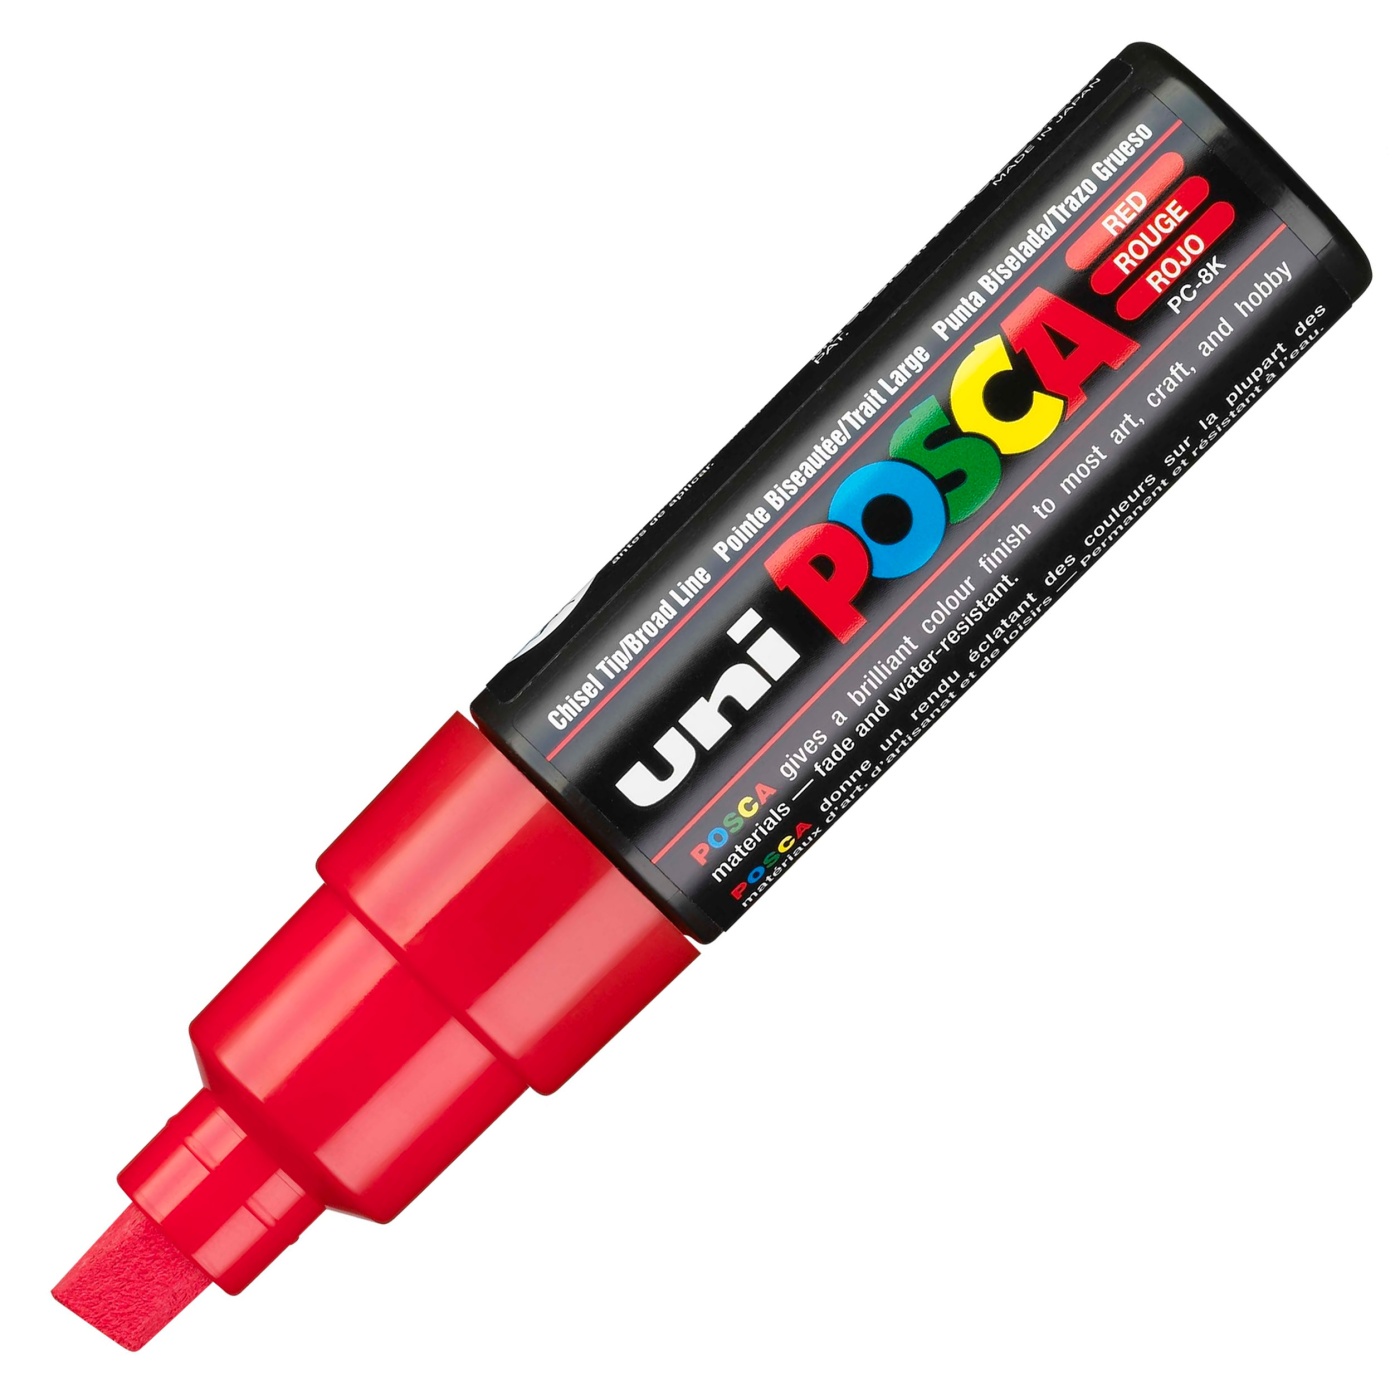 Posca Marker PC-8K Broad in the group Pens / Artist Pens / Illustration Markers at Pen Store (110120_r)